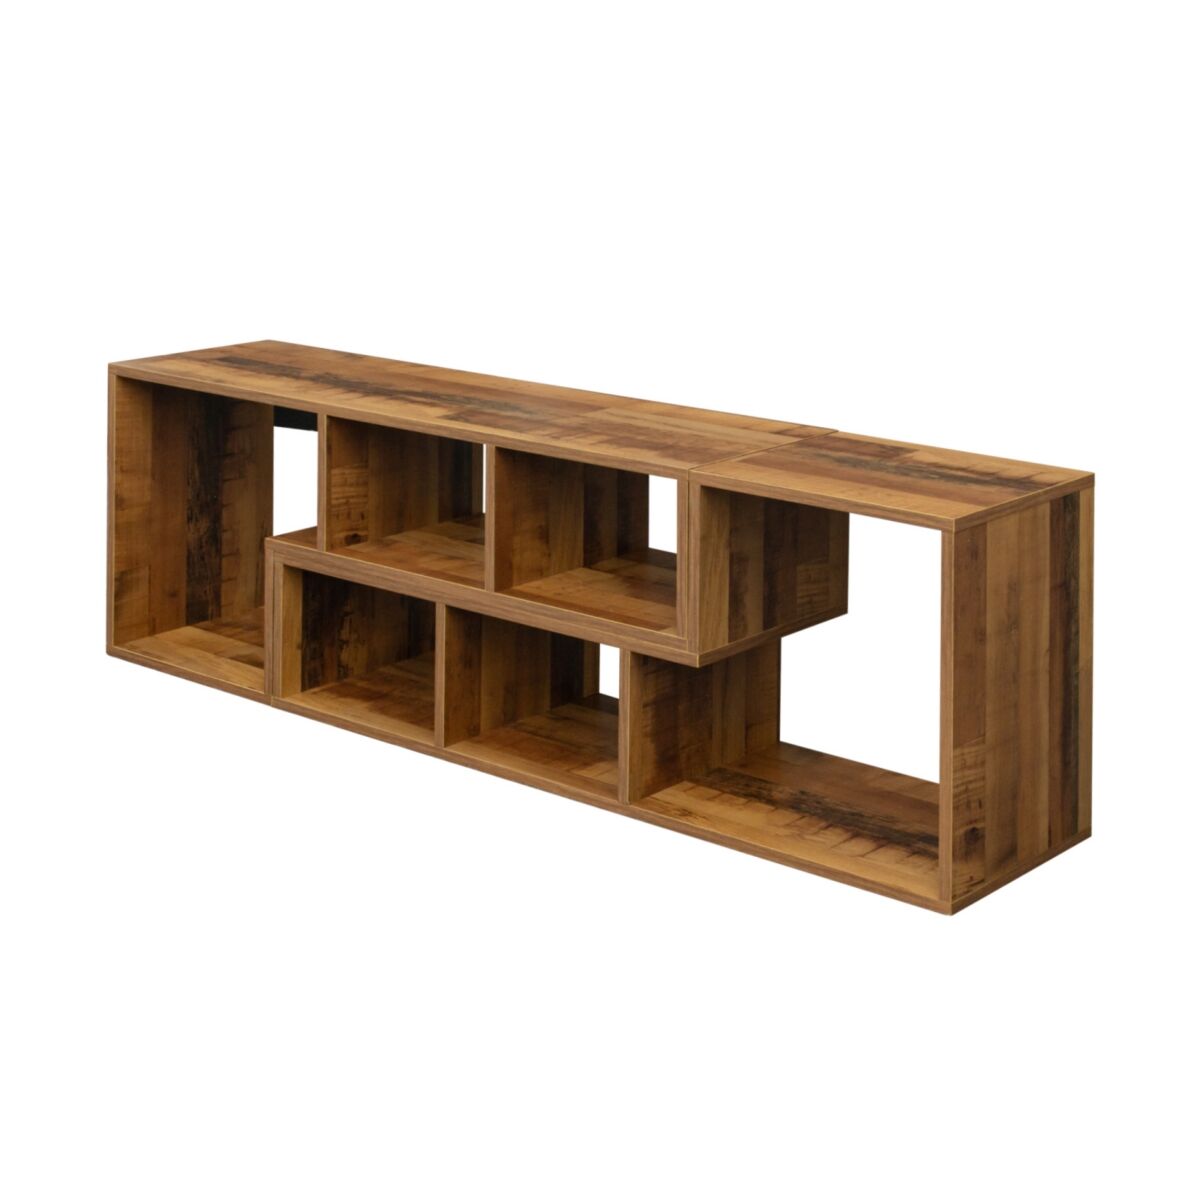 Simplie Fun Double L-Shaped Oak Tv Stand, Display Shelf, Bookcase for Home Furniture, Fir Wood - Brown